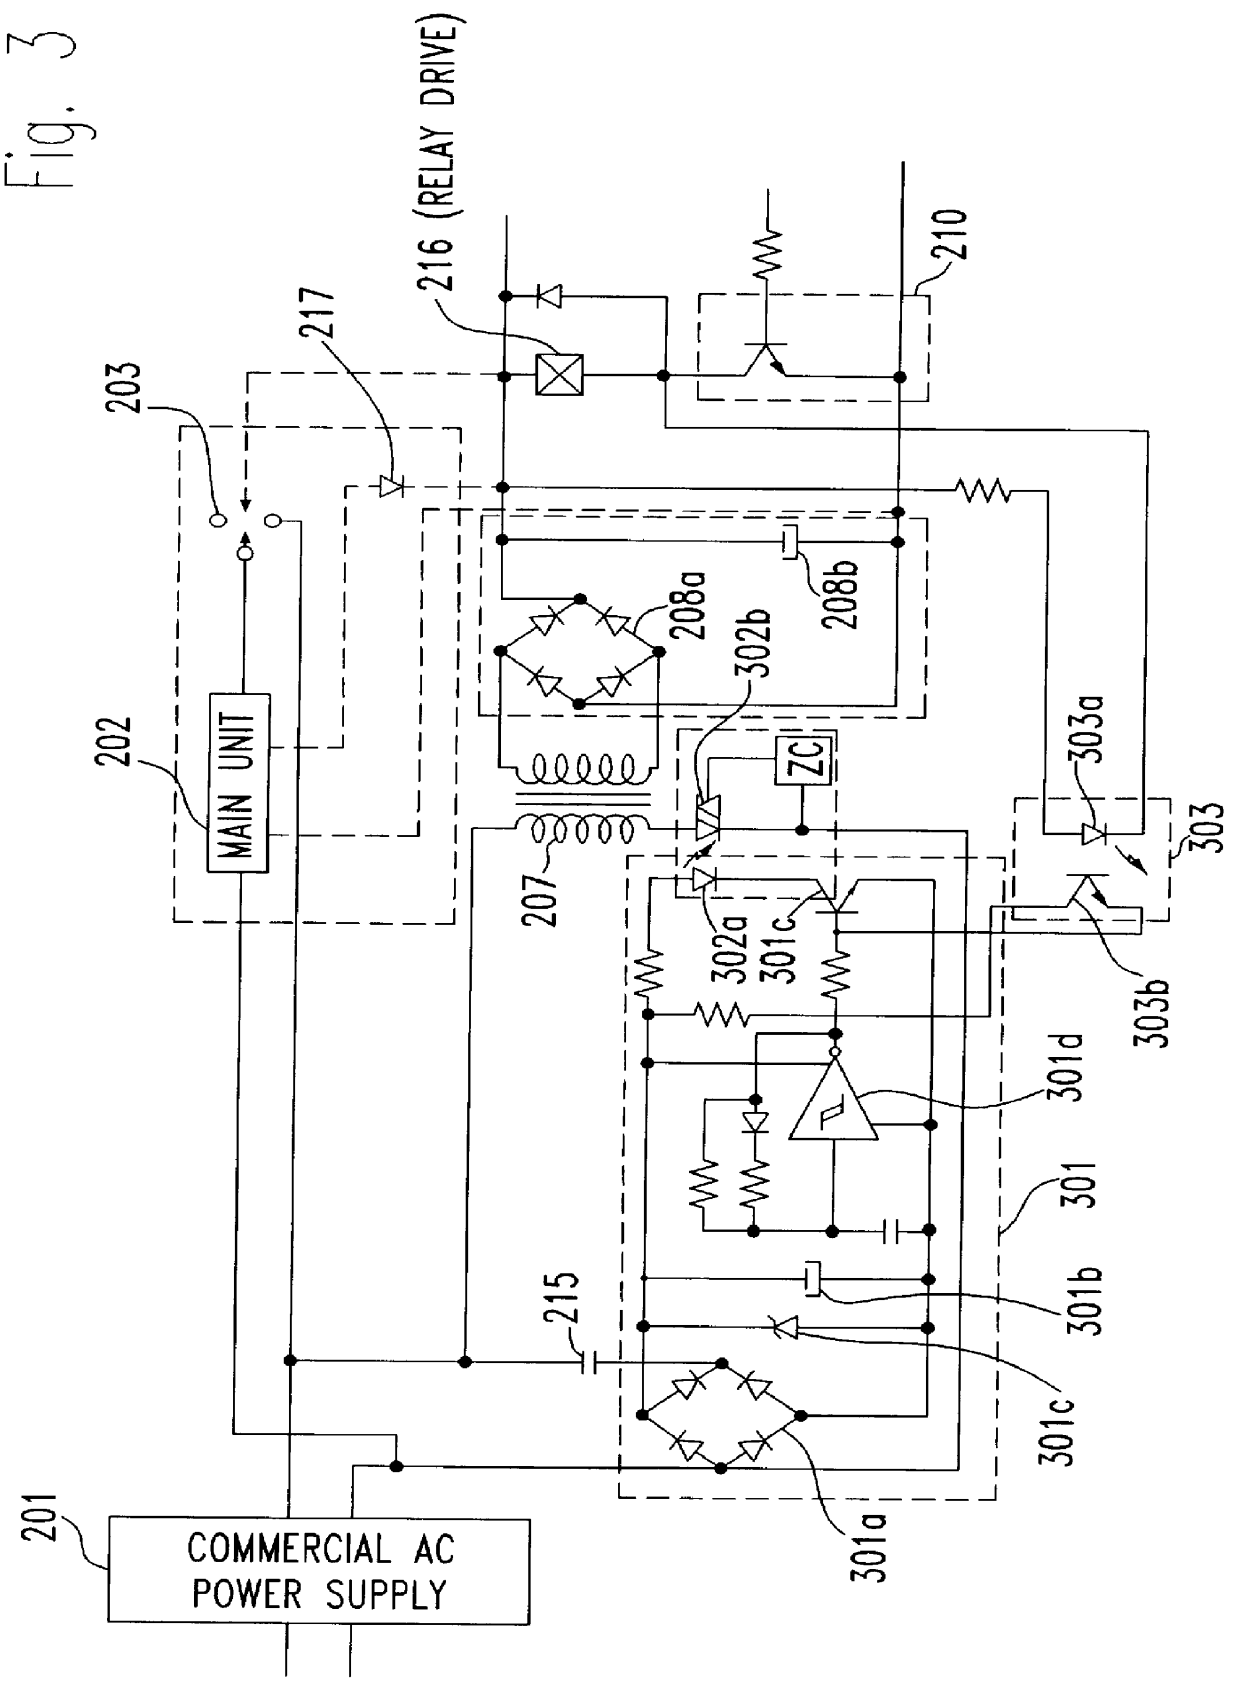 Power supply apparatus for reduction of power consumption